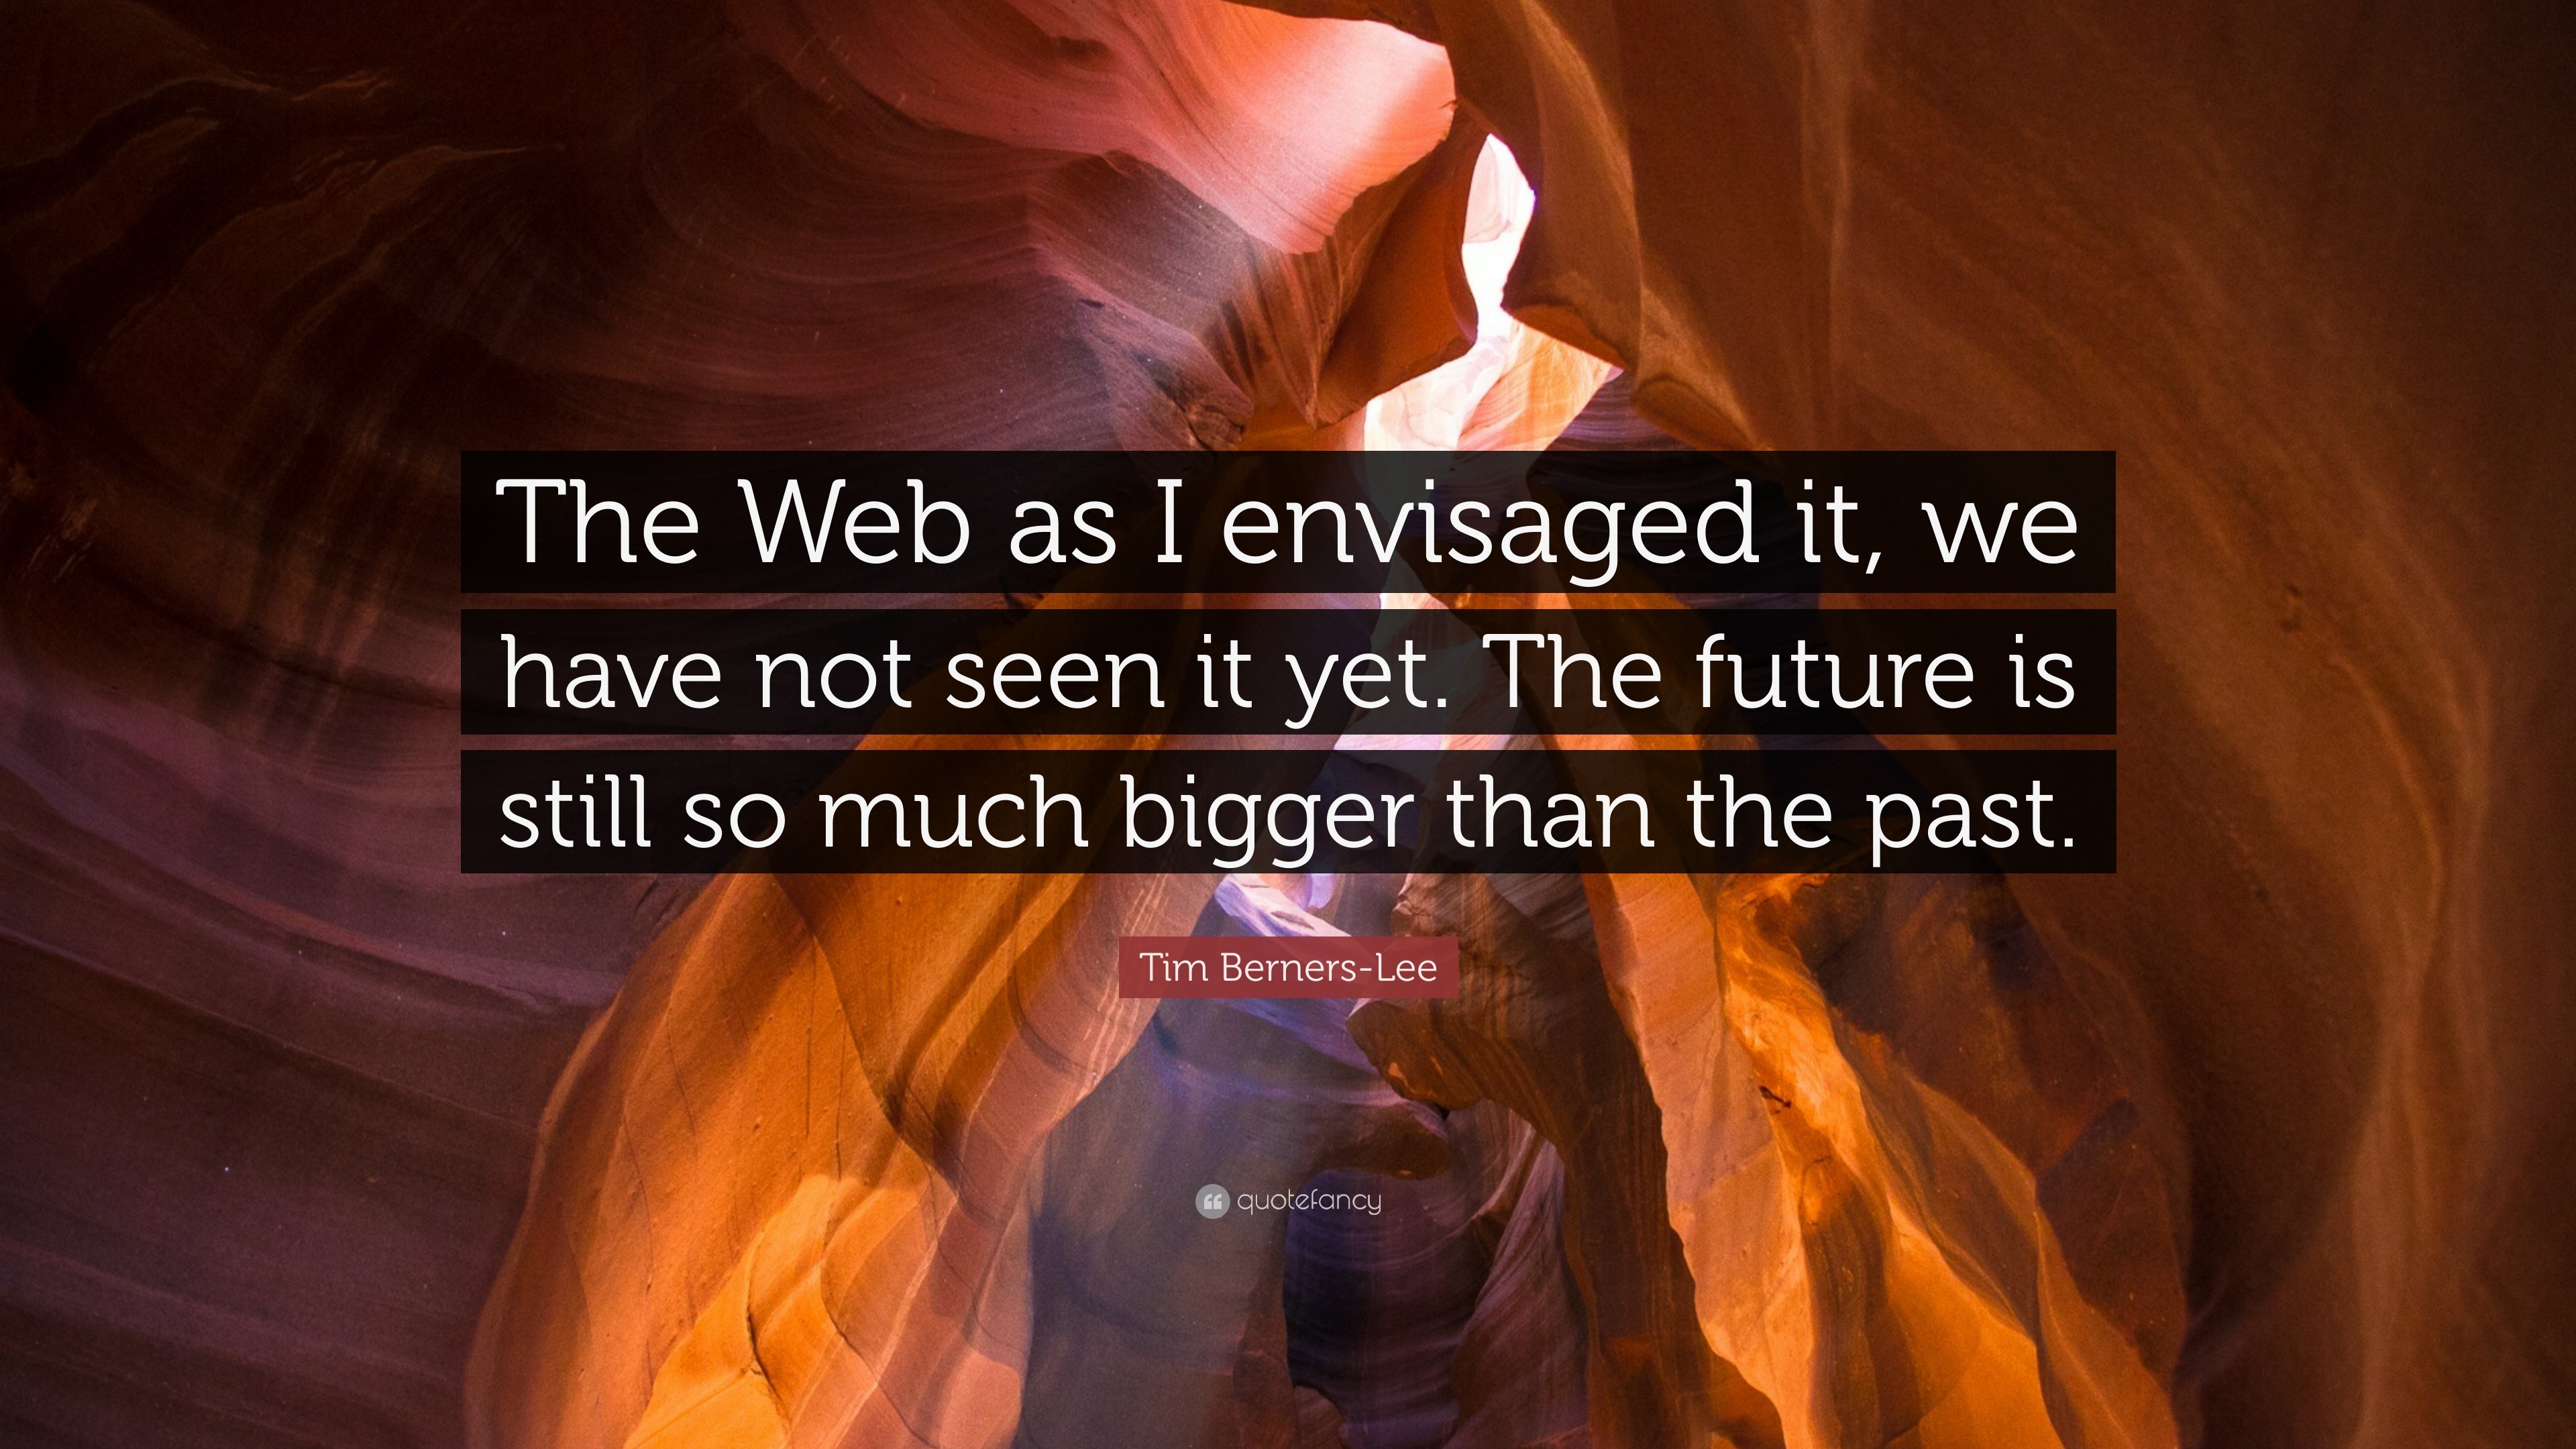 Tim Berners-Lee “The Web as I envisaged it, we have not seen